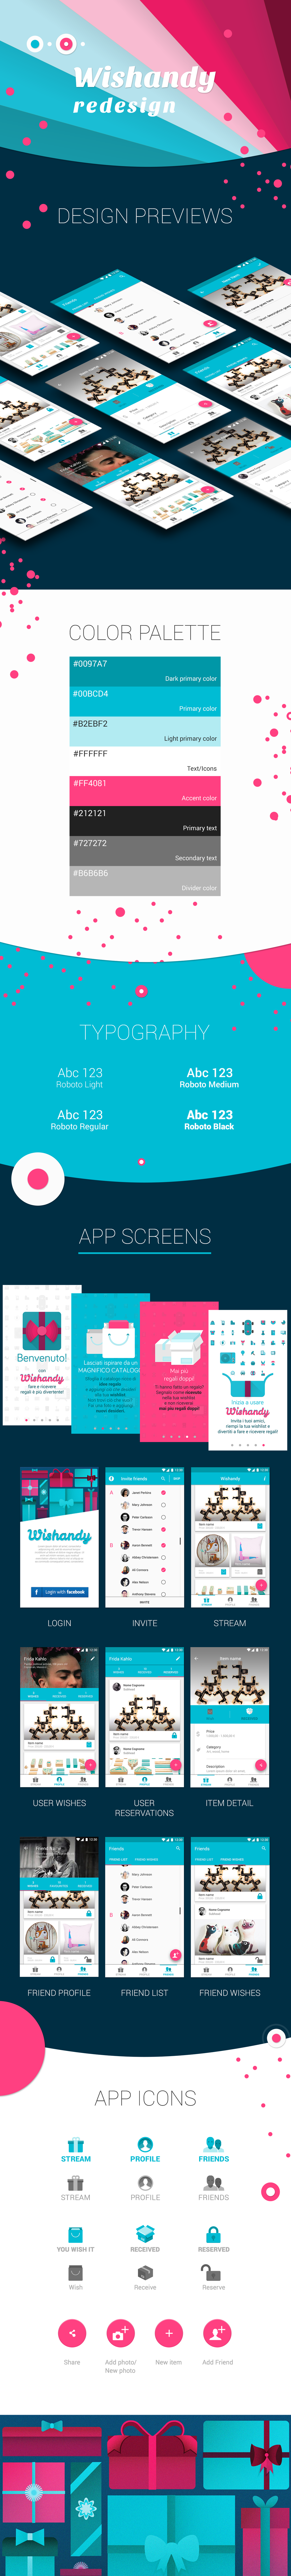 ios android wishlist Mobile app UI ux material design icons